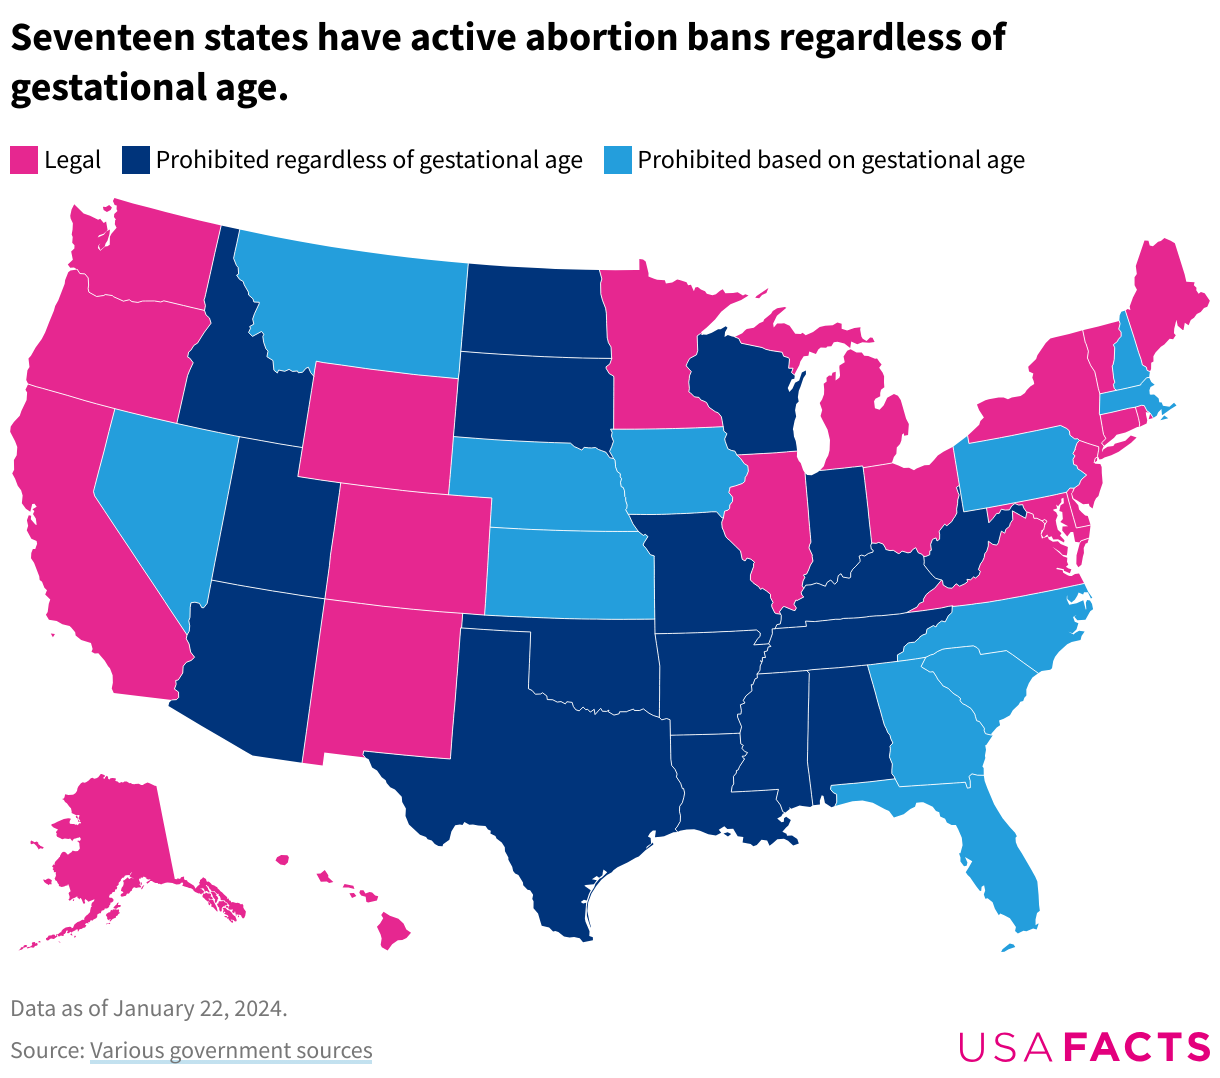 A map showing which states have bans on abortions. Seventeen states have active abortion bans regardless of gestational age.